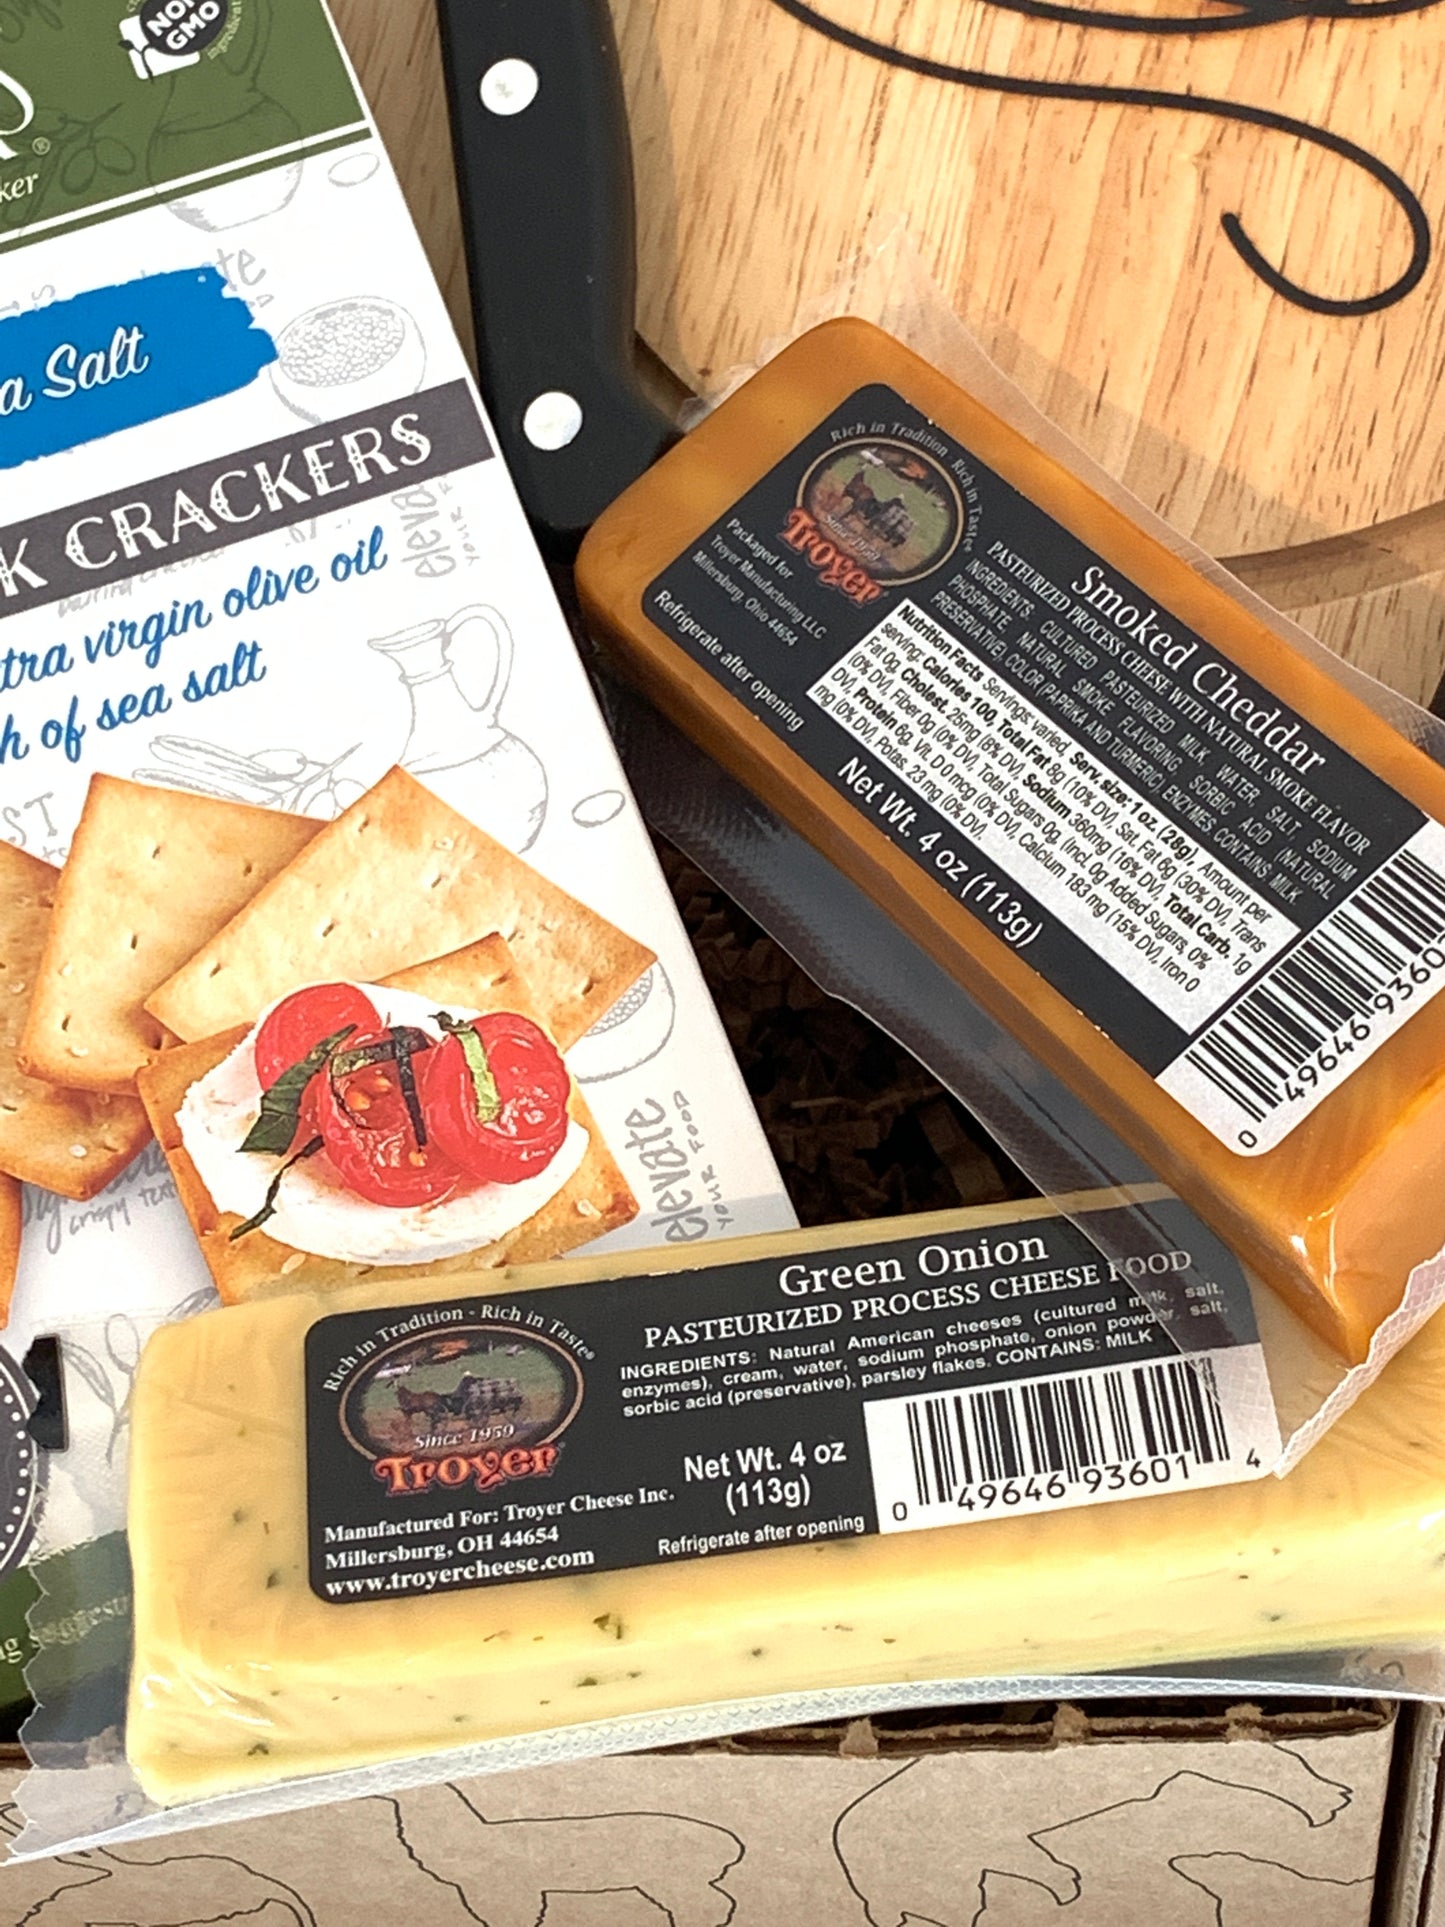 Cheese & Crackers Gift Box with Cutting Board Set by Jerky.com